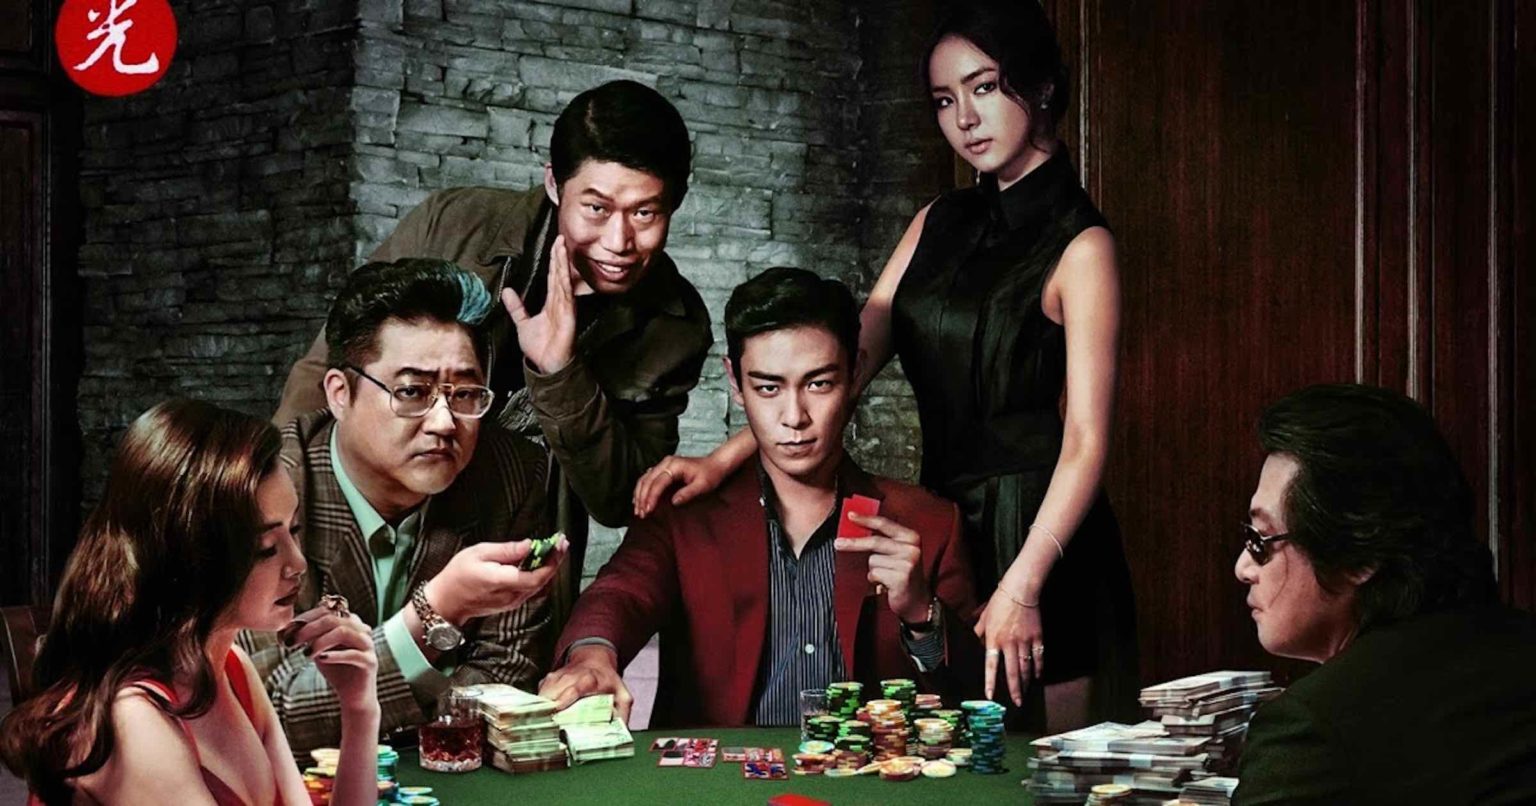 Some U.S. casinos and other sports betting sbobet sites have even taken advantage of Asian’s love for gambling. Here's why gambling is their passion.